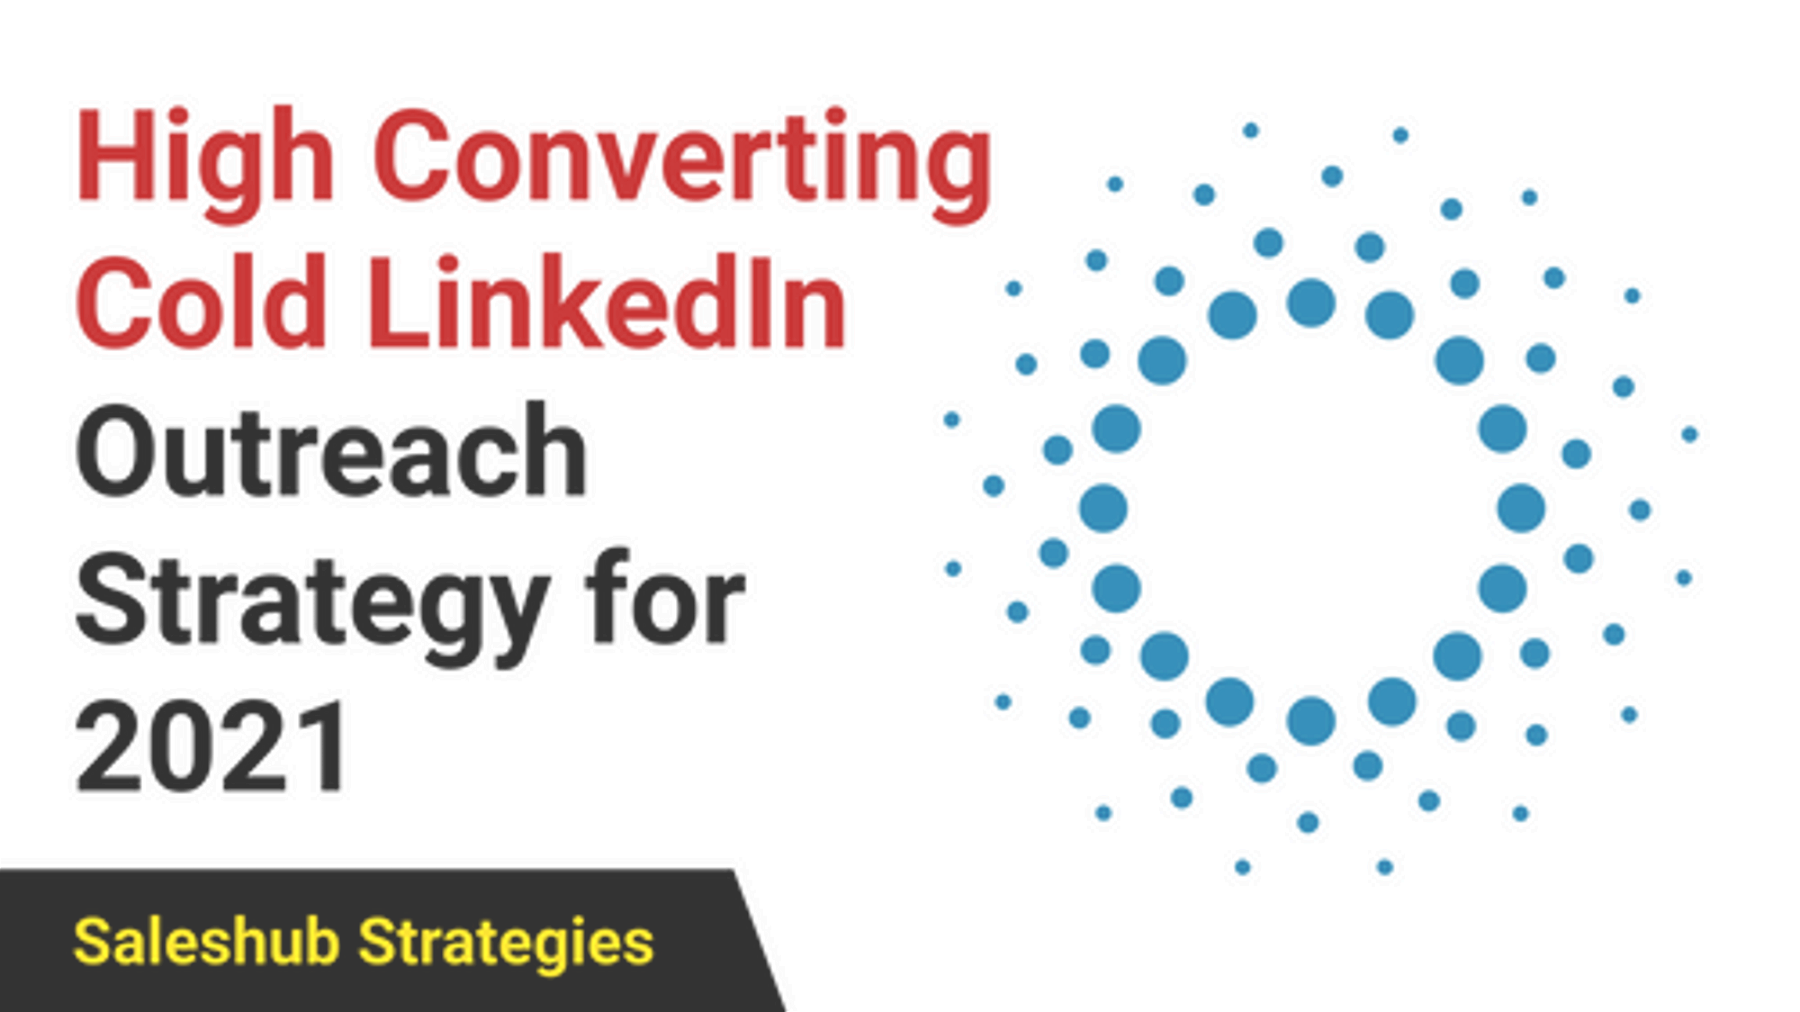 High Converting Cold LinkedIn Outreach Strategy for 2021